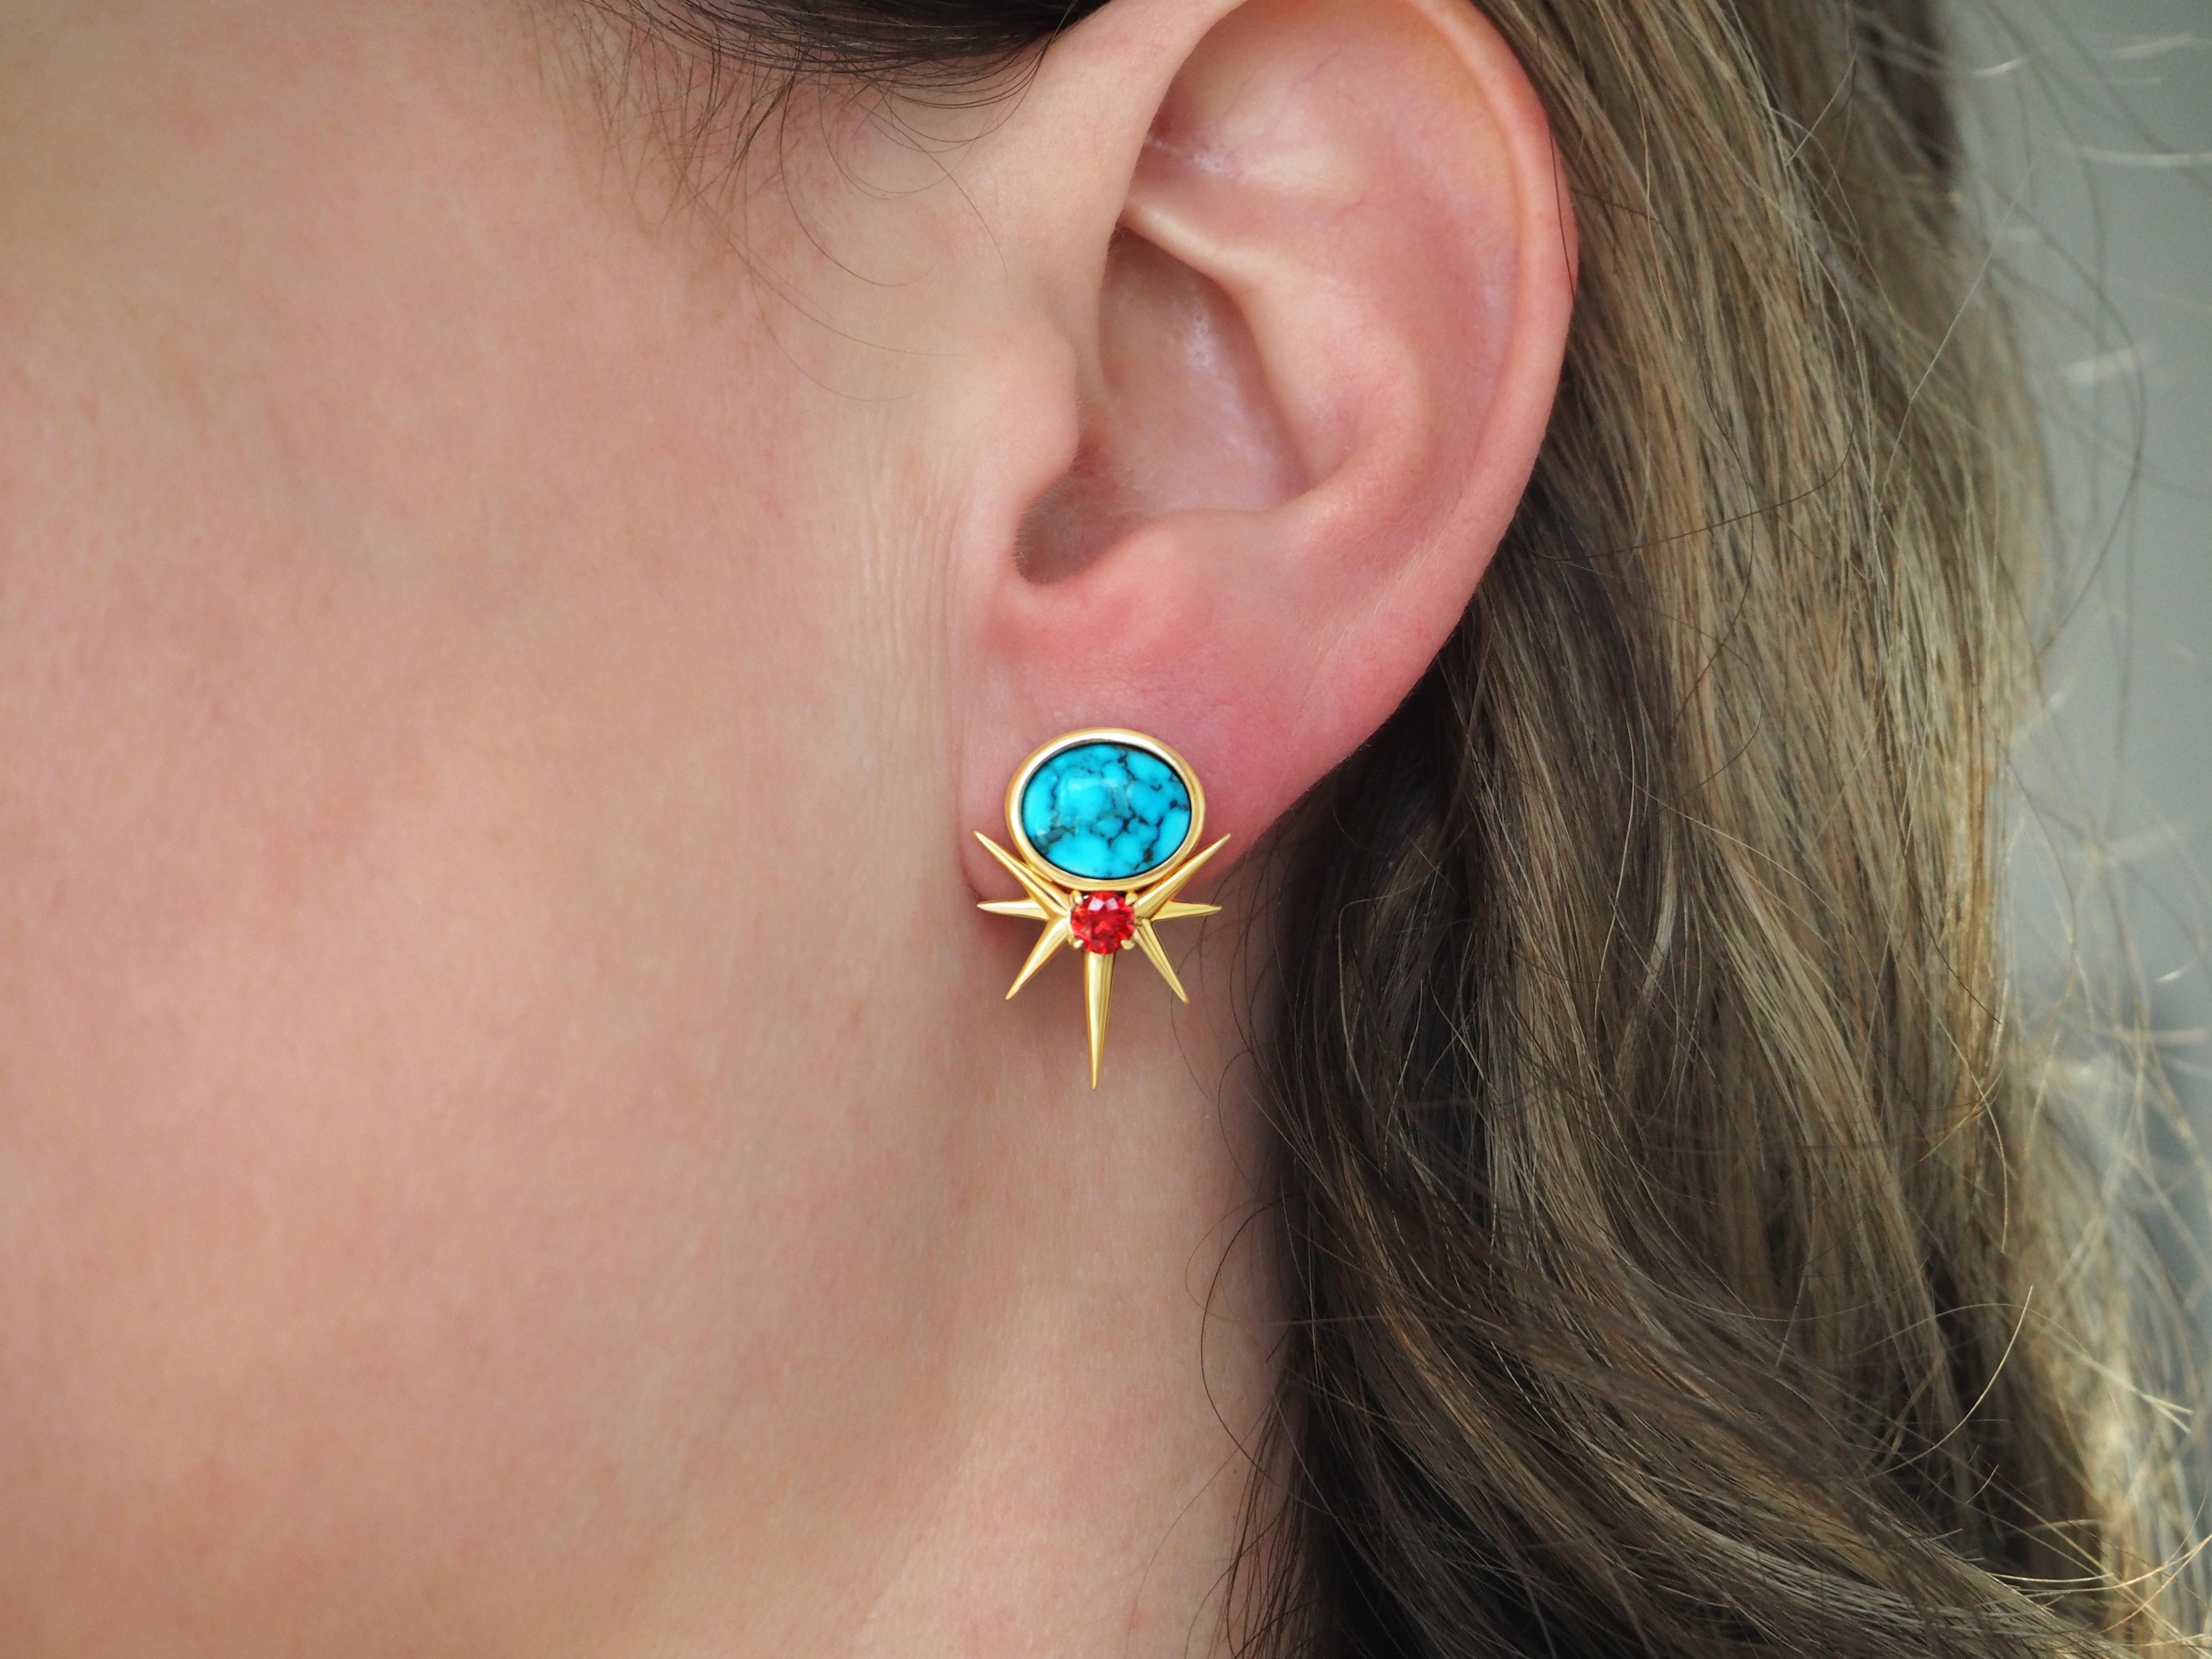 - 14ct Yellow Gold Approx 6.4gms
- Approx 15.3mm Wide x 22mm Length
- Natural Kingman Turquoise Oval-Shaped Cabachon 10mm x 8mm
- 2 x Round Blood-Orange Color Sapphires Approx 0.50ct
- Push Back Butterflies

Turquoise, Blood-Orange Sapphire Spike